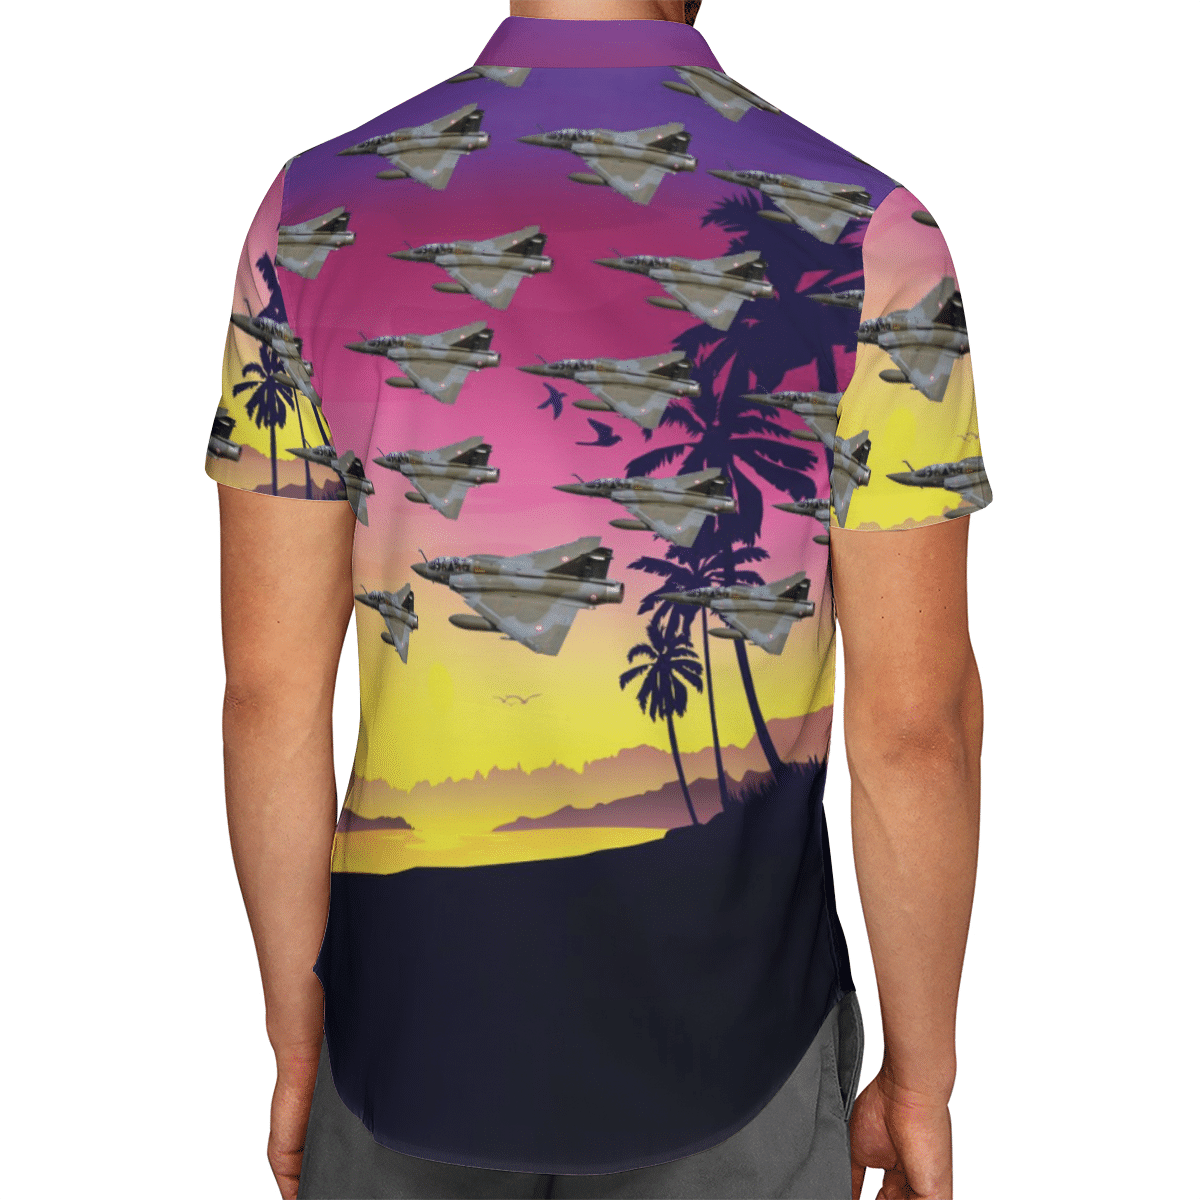 Going to the beach with a quality shirt 75